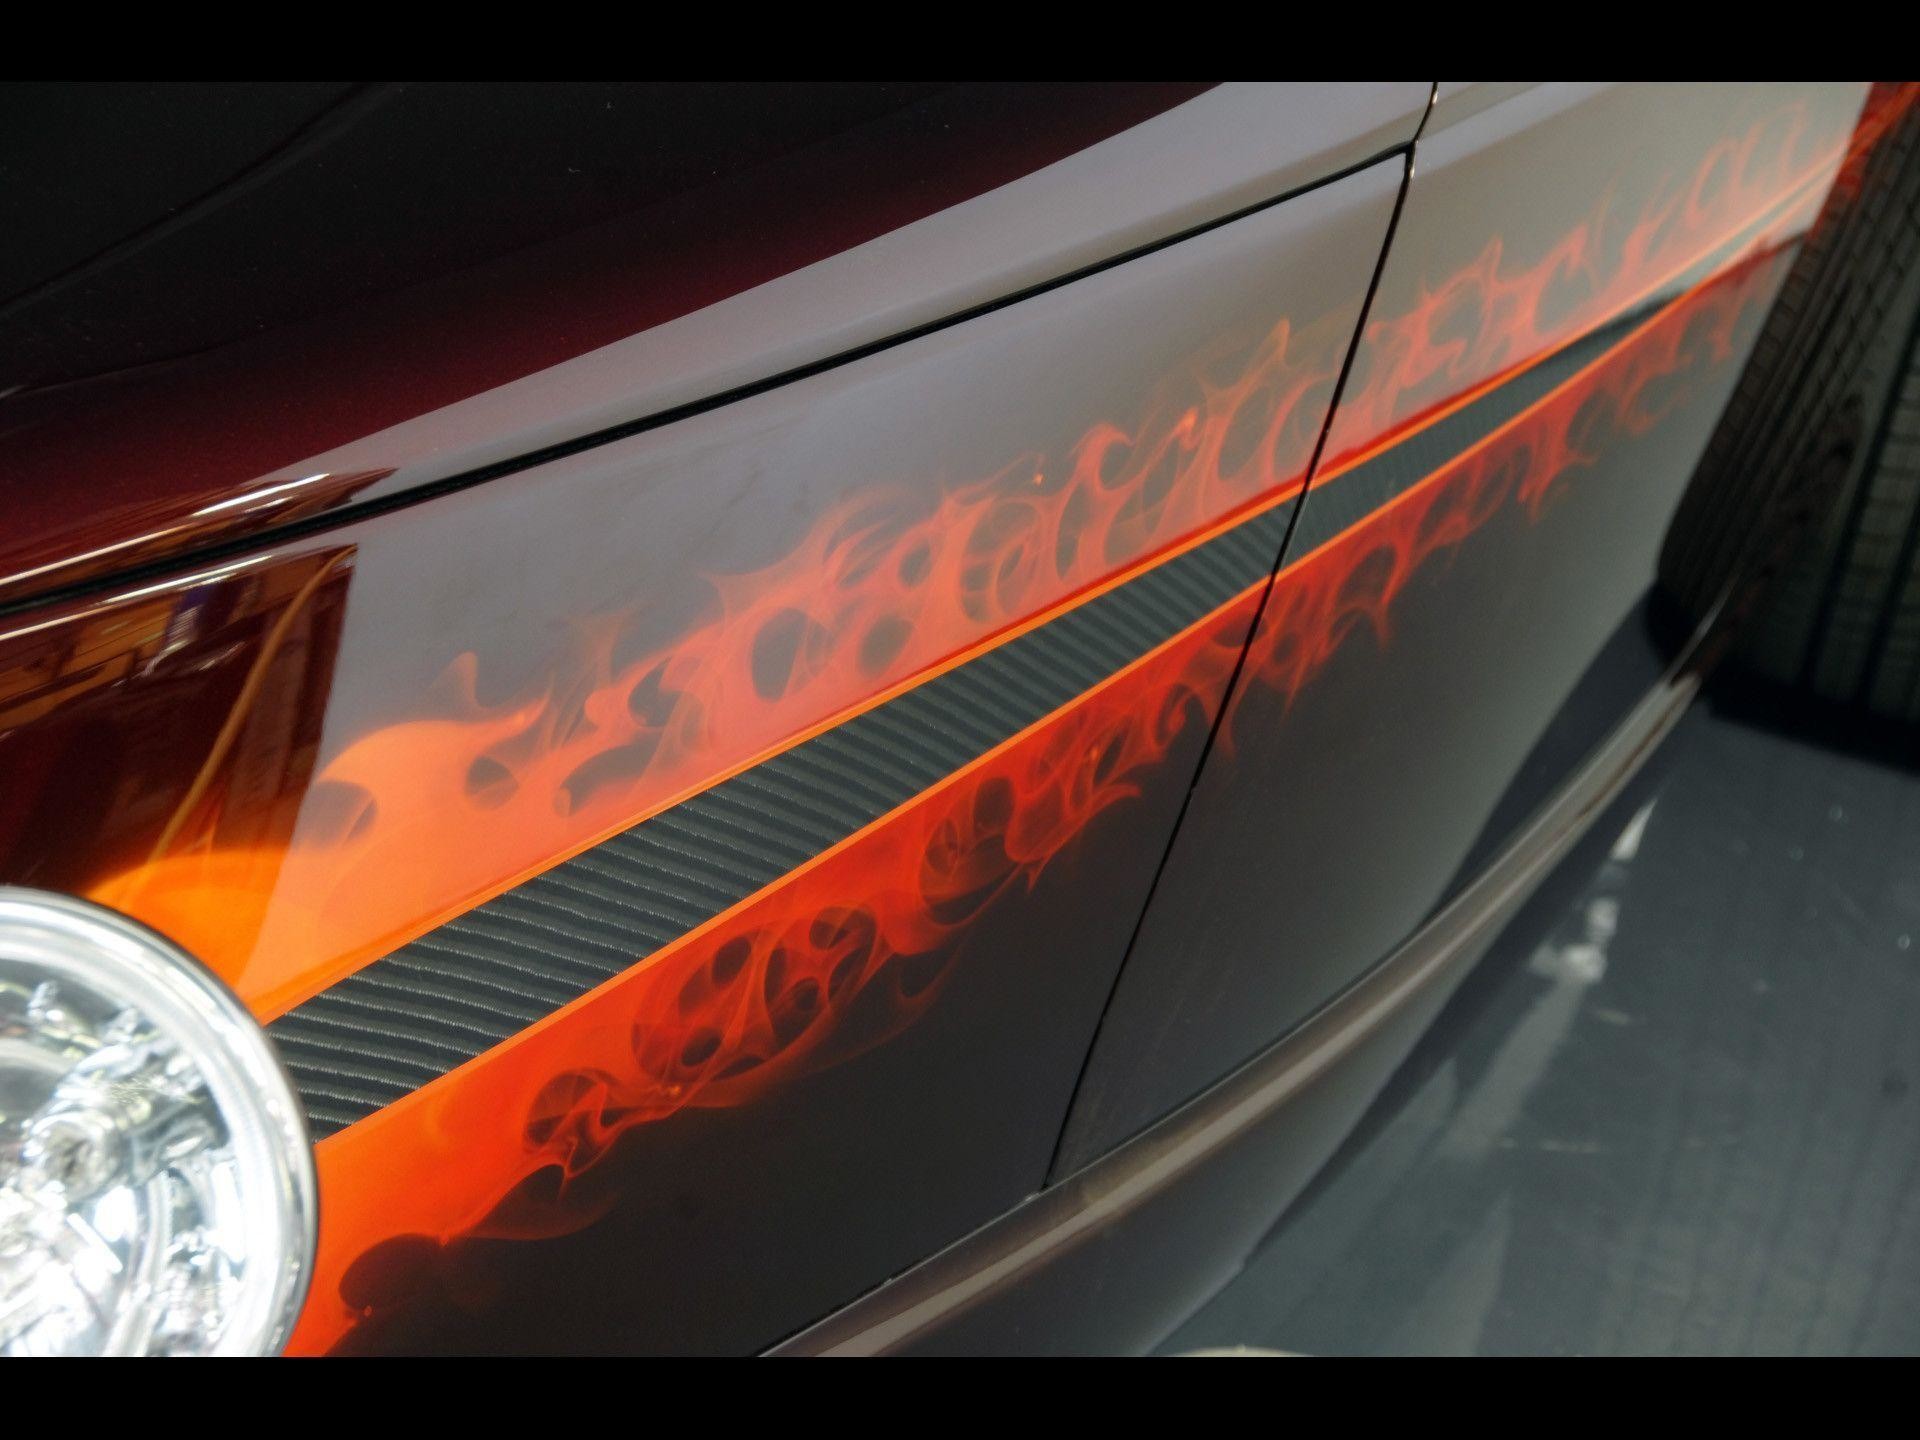 2008 Foose Coupe Flame Graphic 1920x1440 Wallpaper 1920x1440